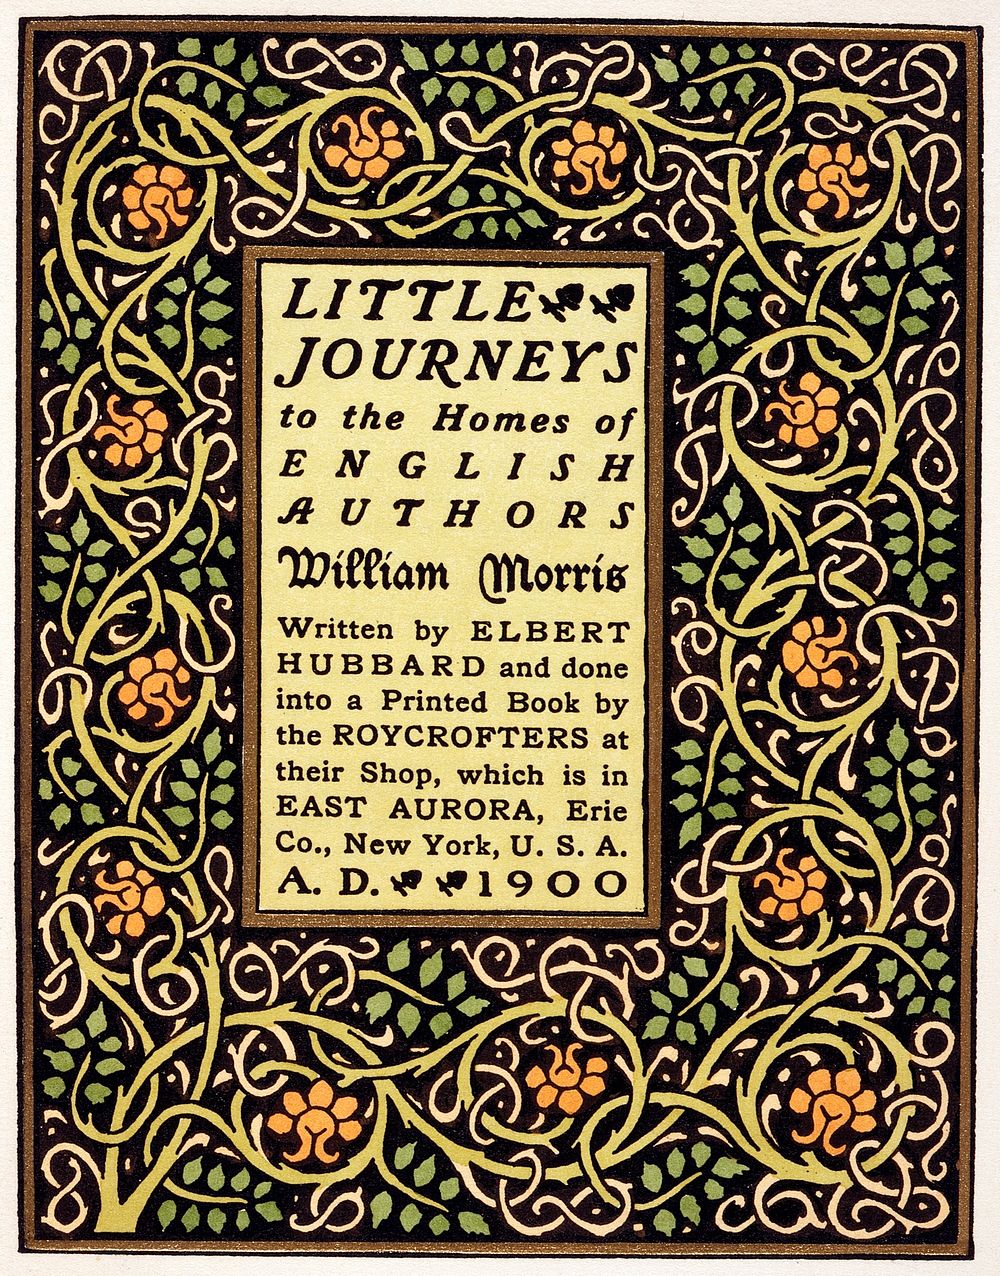 Book, 'Little Journeys to the Homes of English Authors: William Morris' by Elbert Hubbard by Roycroft Press and Samuel Warner